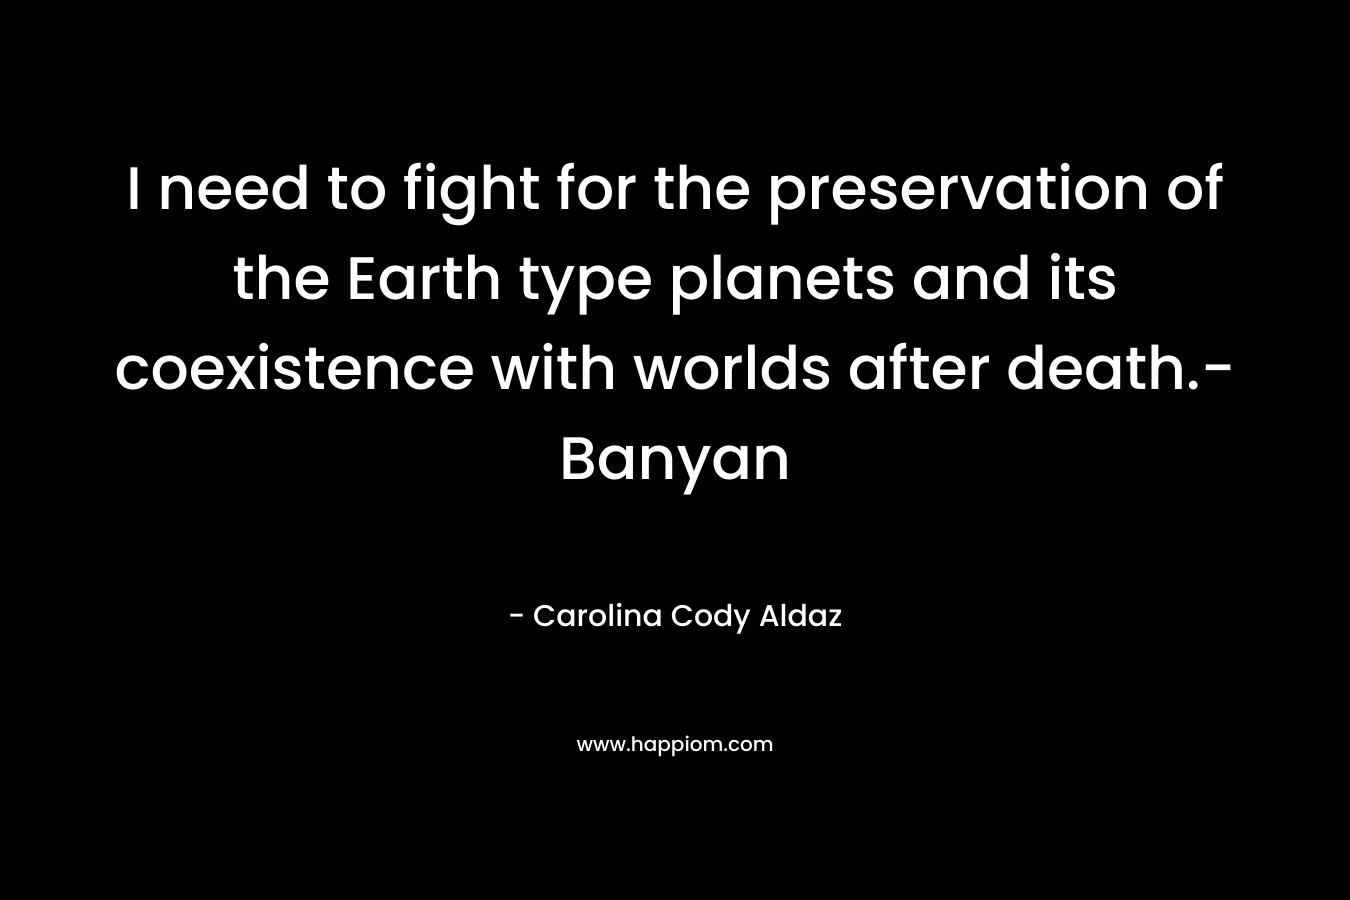 I need to fight for the preservation of the Earth type planets and its coexistence with worlds after death.-Banyan – Carolina Cody Aldaz